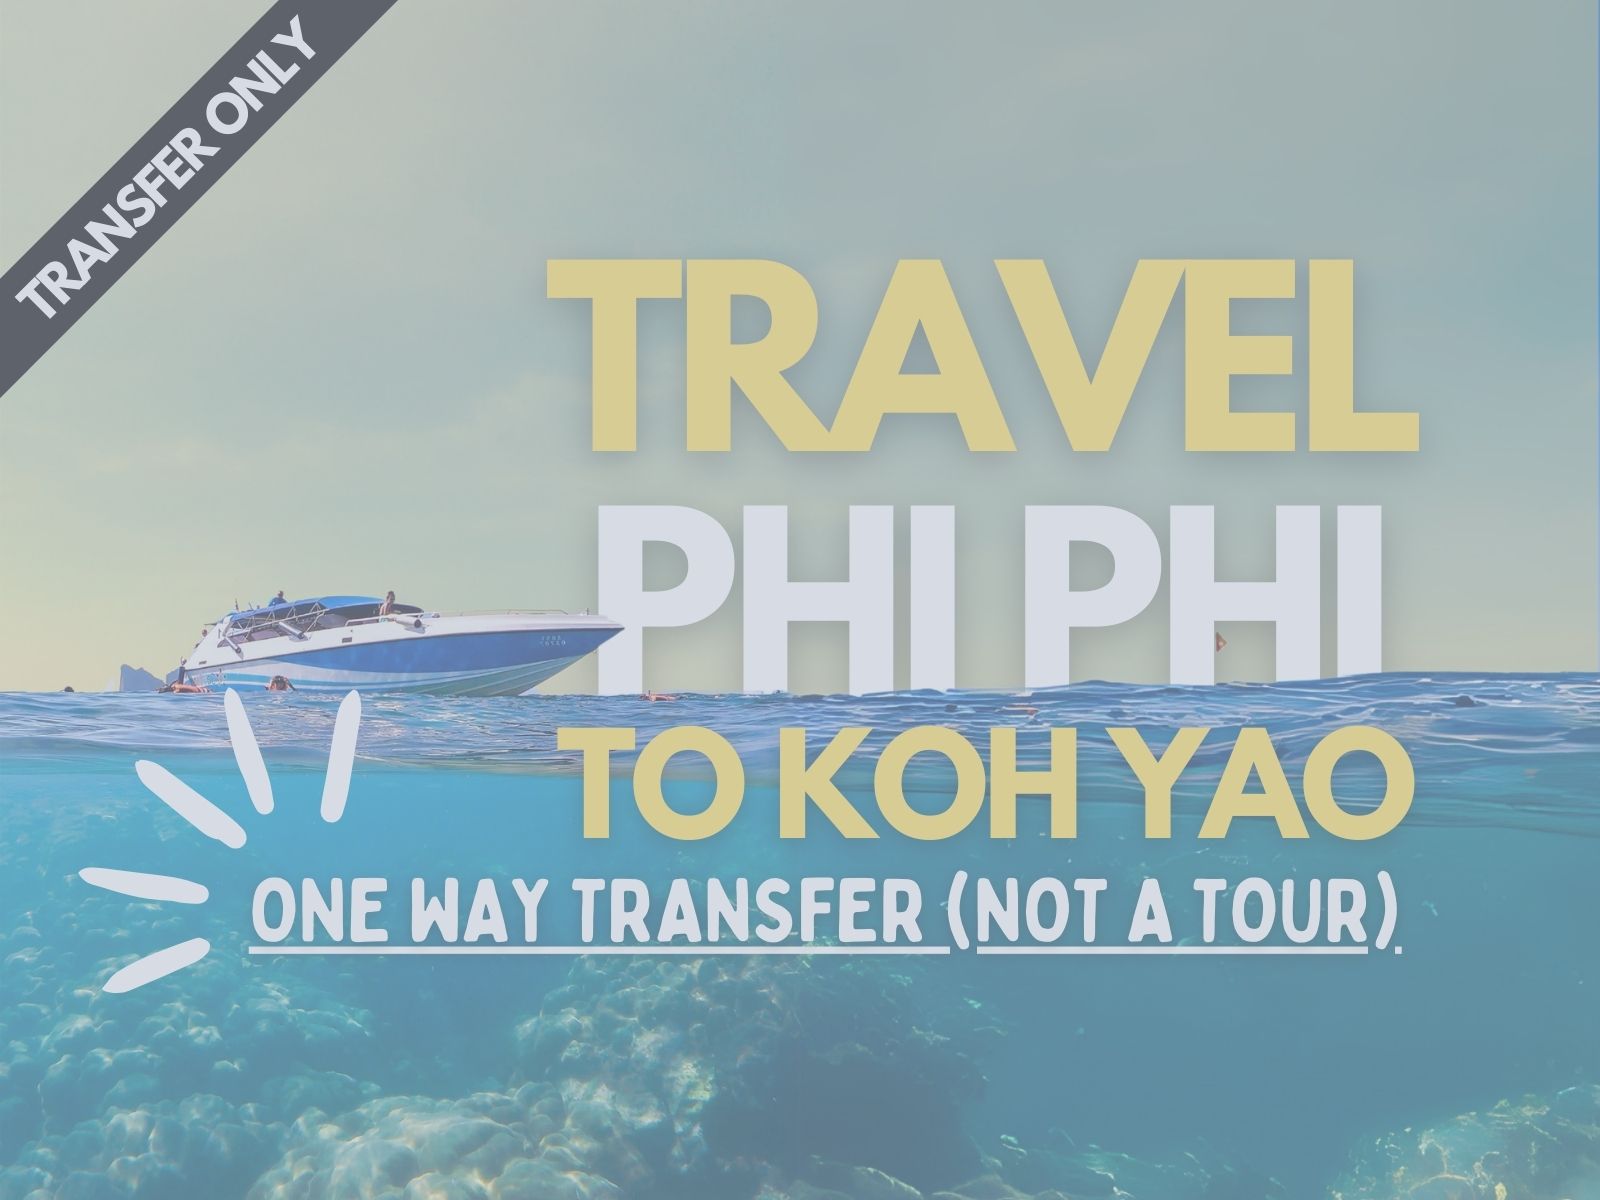 One way speedboat transfer travel ticket from Phi Phi Island to either Koh Yao or Koh Yai on Noi Isalnds. Not a tour, phi phi tour not included one way travel ticket only